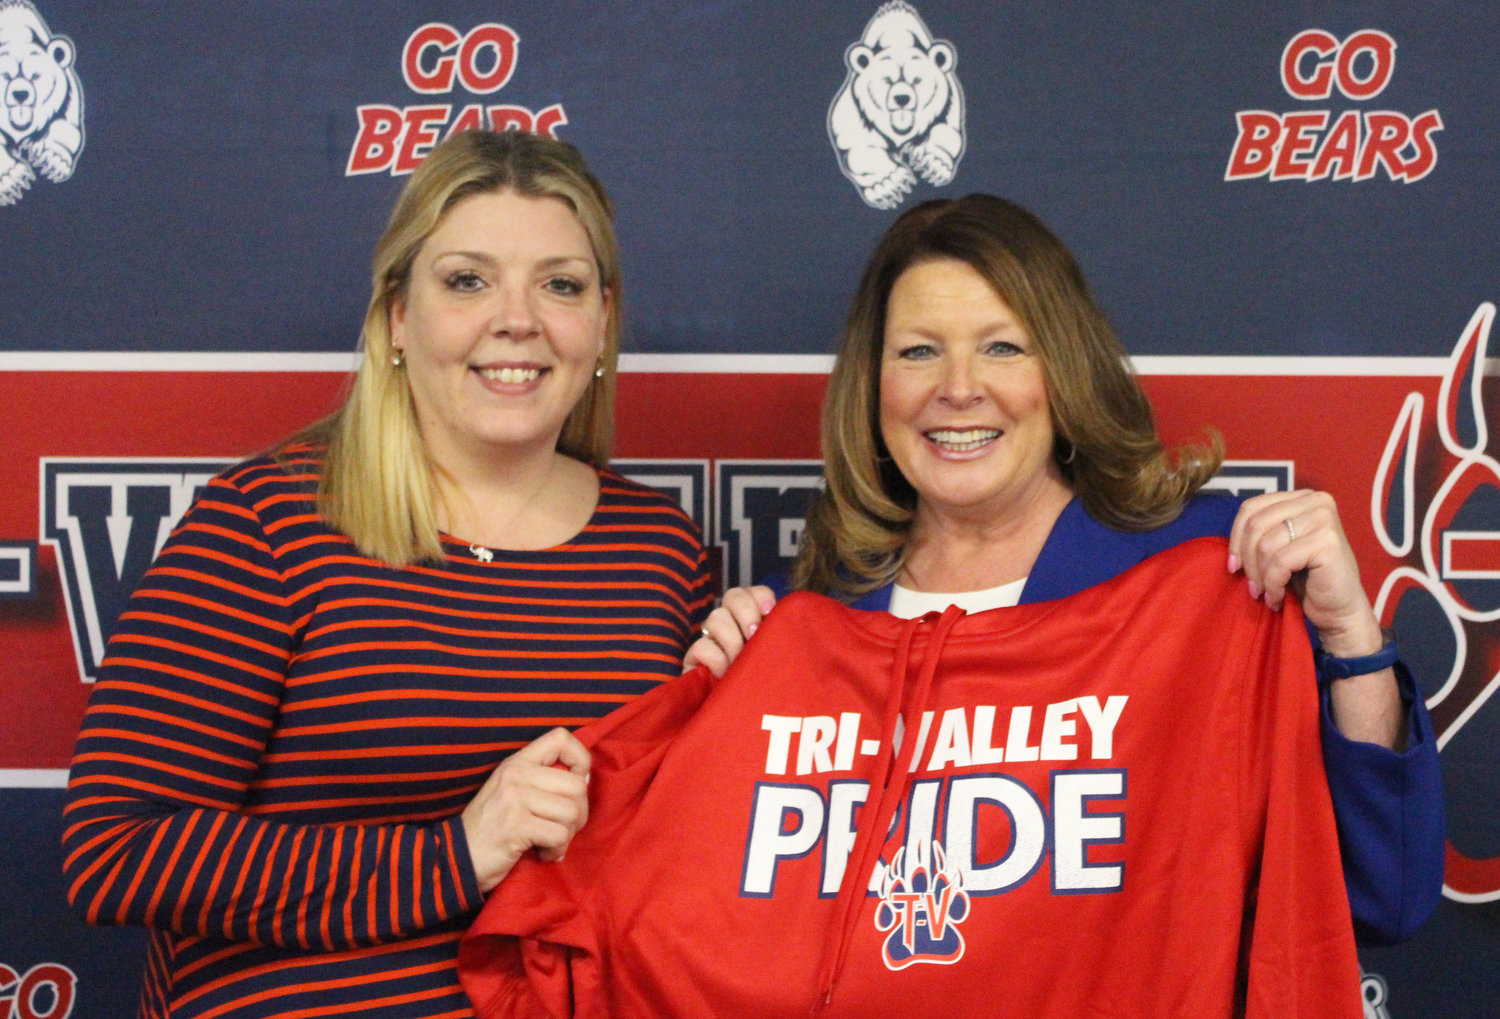 Tri-Valley Board of Education (BOE) President Keri Poley, left, presented incoming Superintendent Erin Long with some Bears gear following her appointment at this week’s BOE meeting.